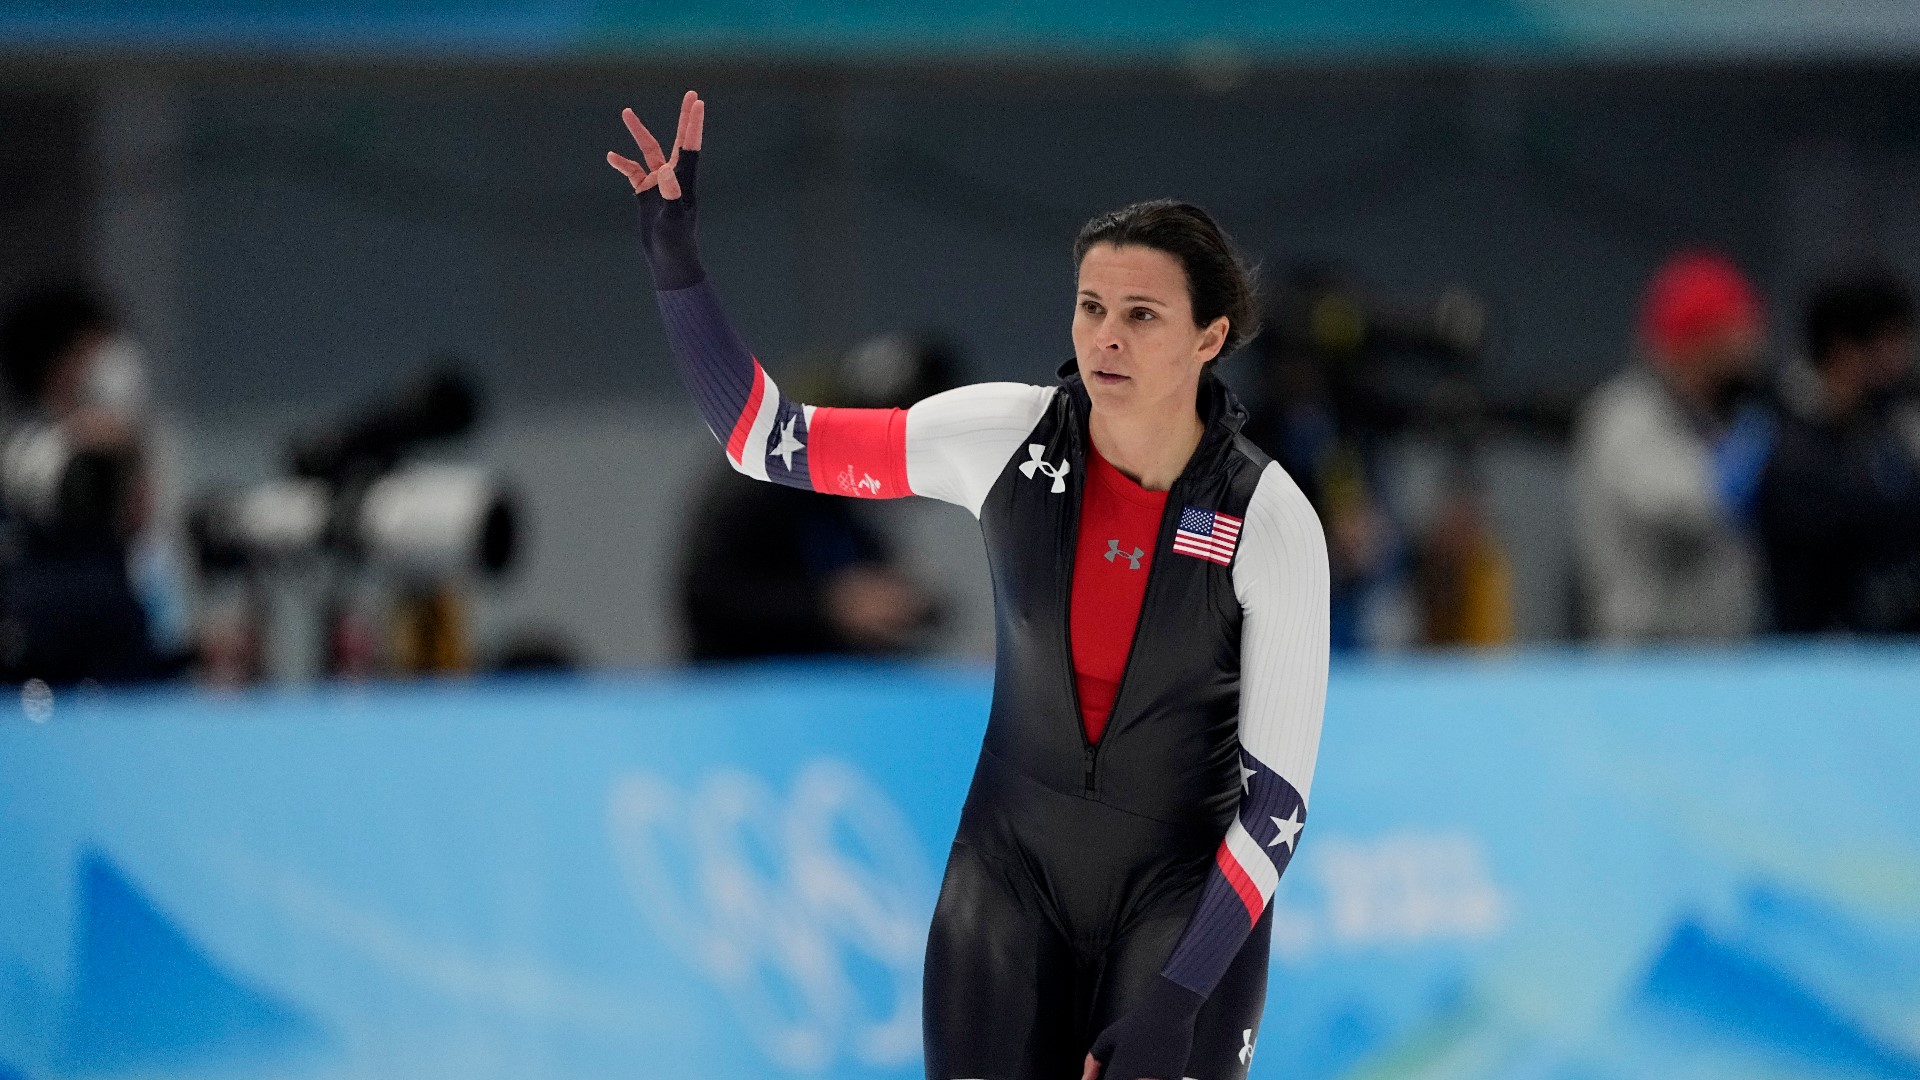 U.S. speedskater Brittany Bowe won the first individual Olympic medal of her career. She skated in the last pairing of 15 and recorded a time of 1:14:61.